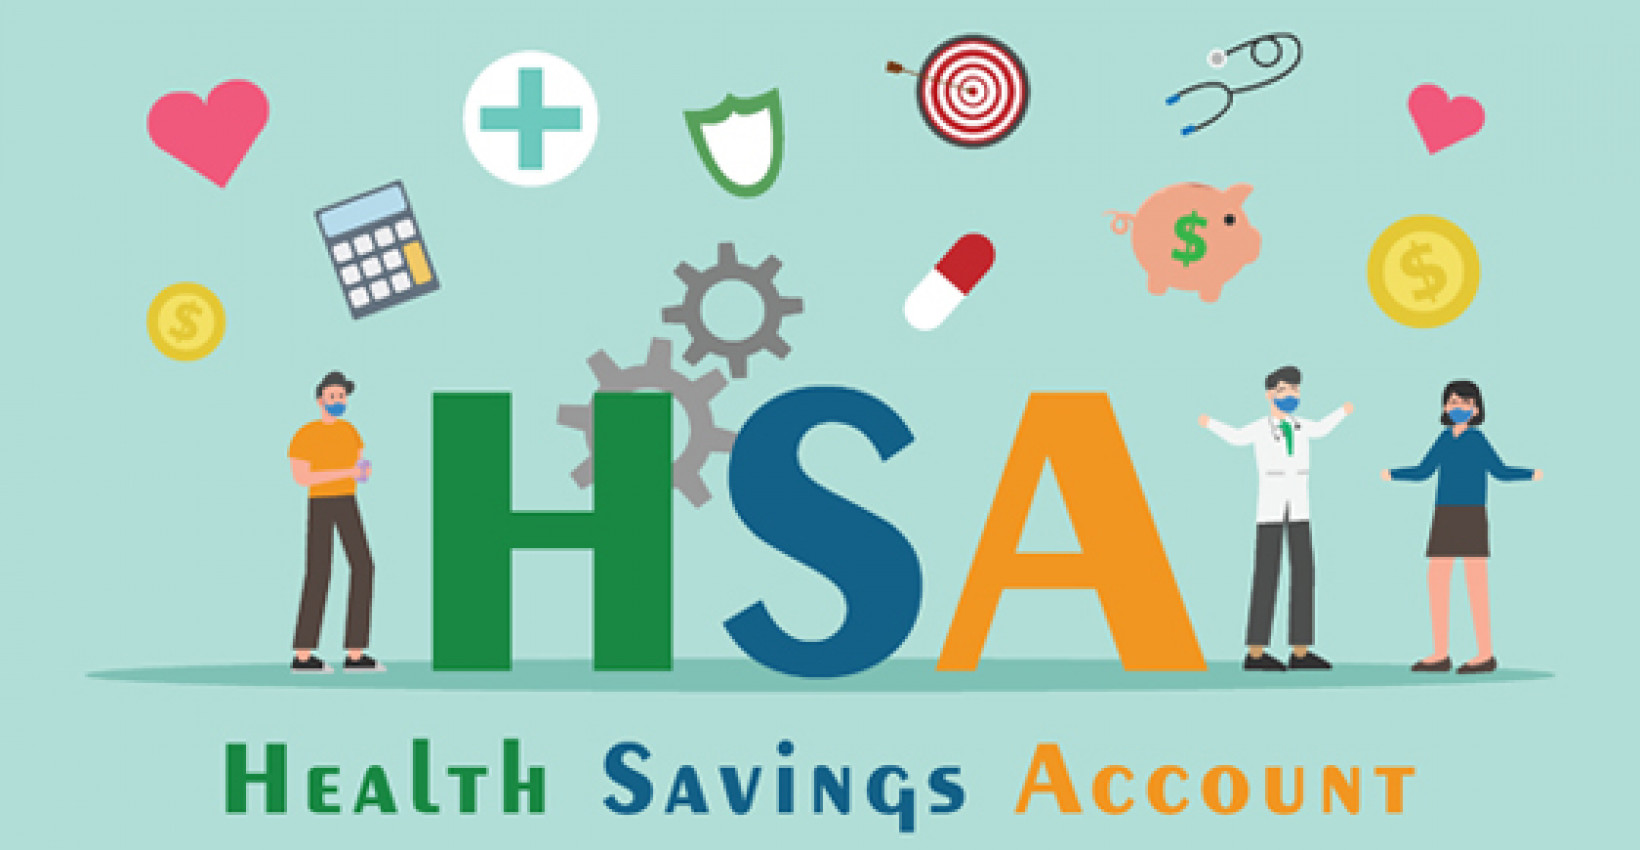 An illustraion of the letters "HSA" surrounded by various health-related icons and characters